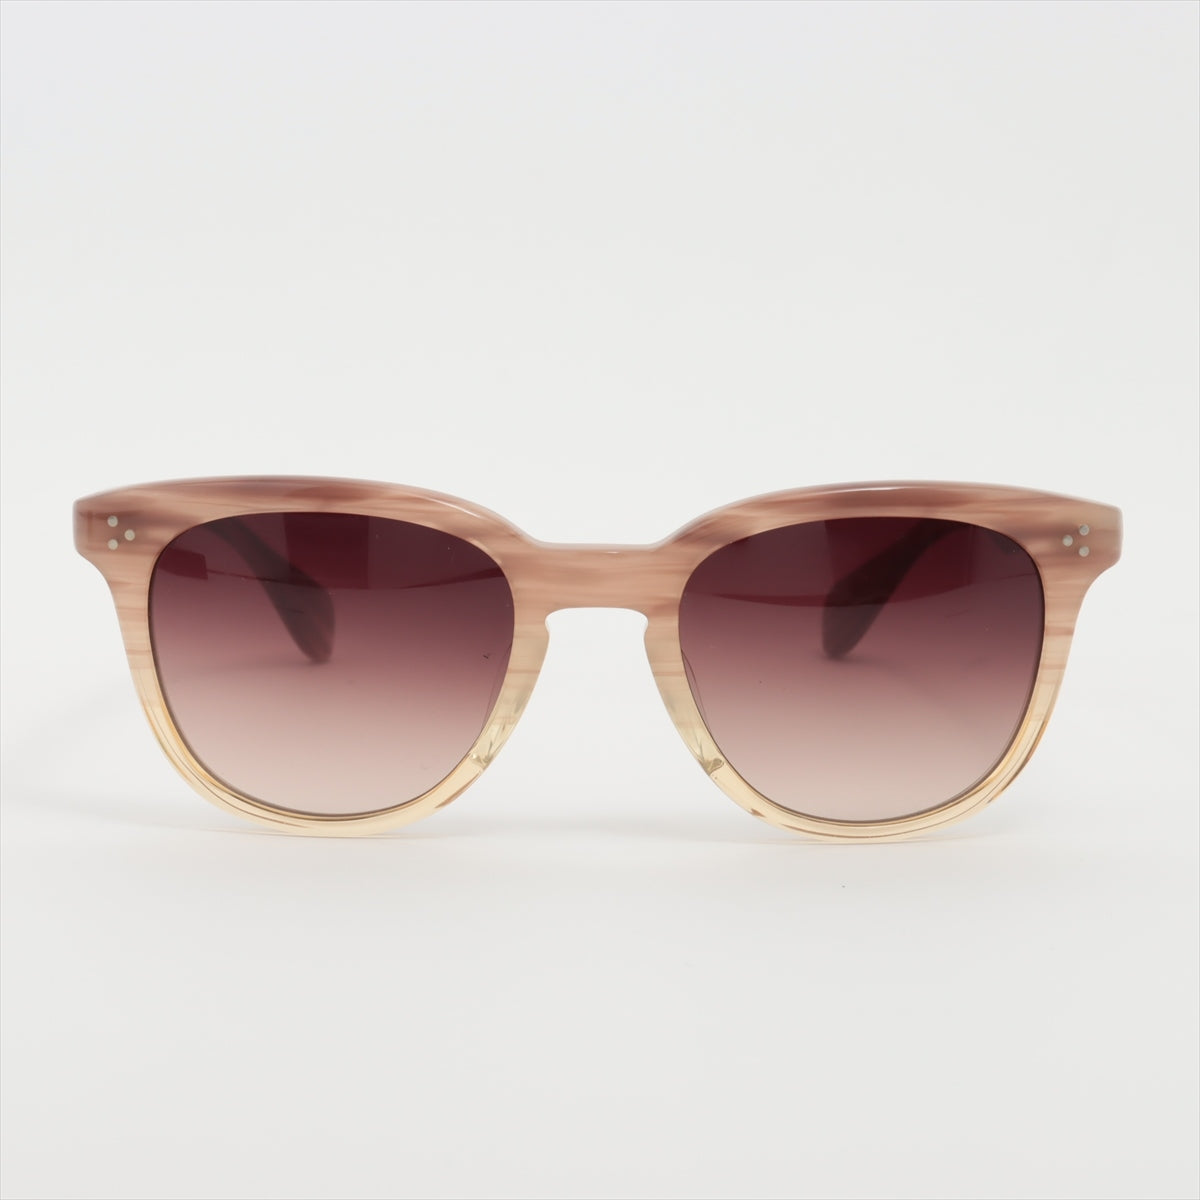 Oliver Peoples Offsay Sunglasses Plastic Brown